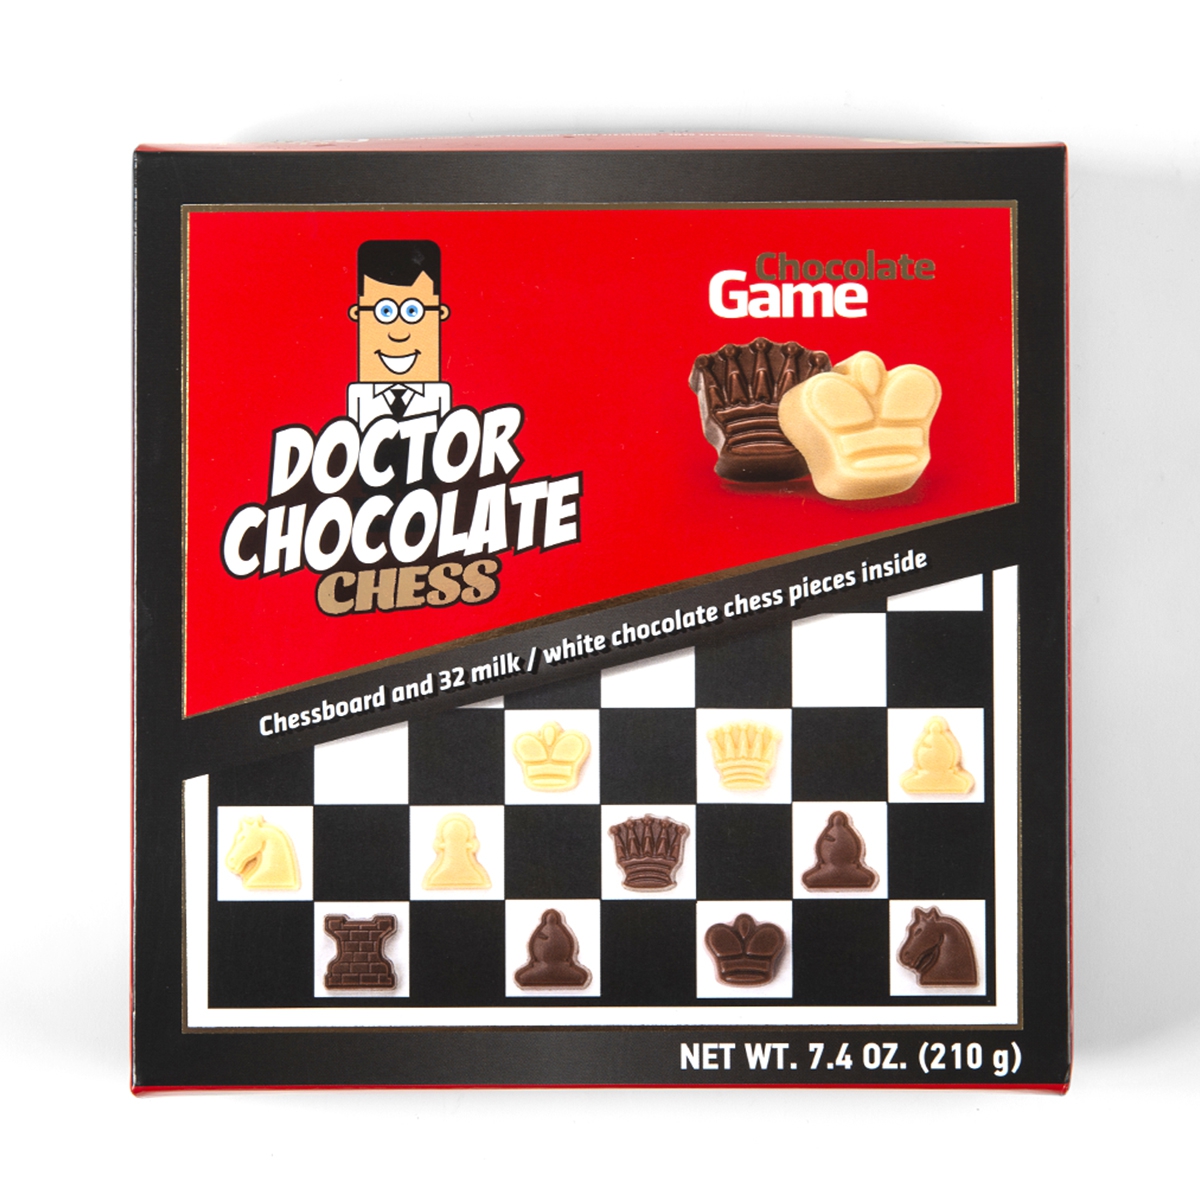 DR CHOCOLATE CHESS